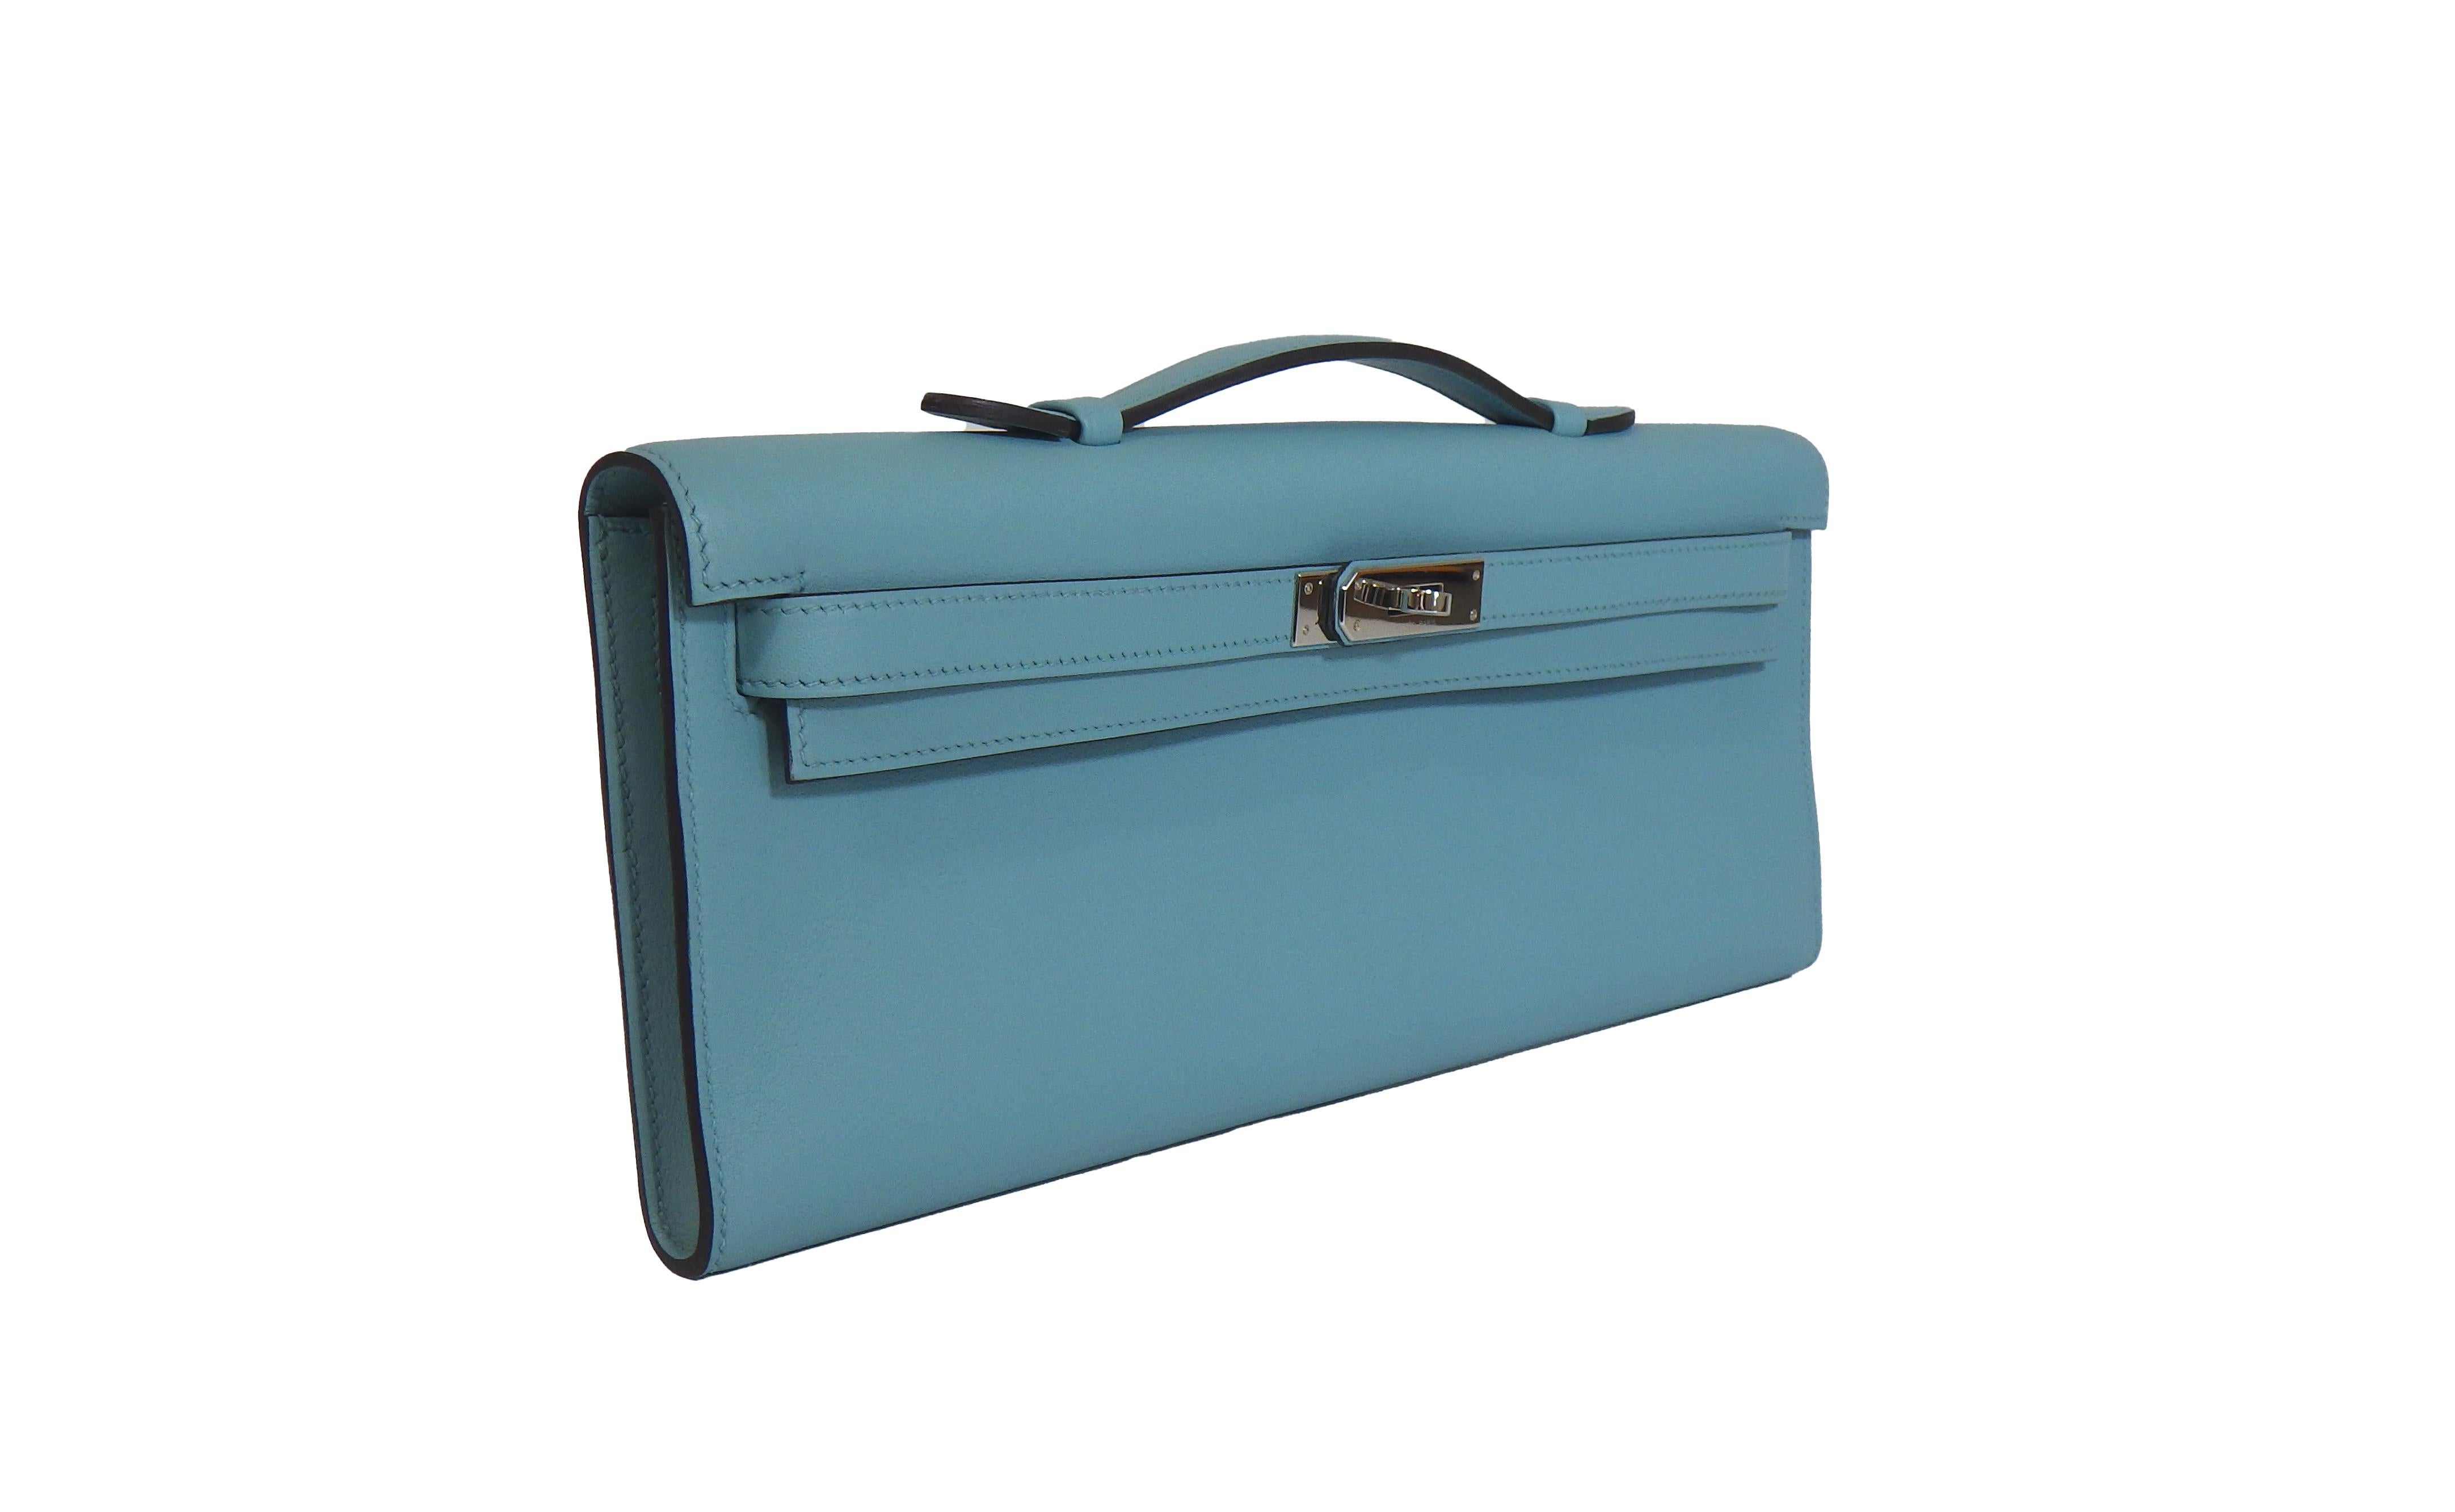 Hermes - New w/ Tags - Kelly Cut Clutch 2016 - Blue Attol - Handbag

Description

A petite version of the Hermès Kelly Bag, the Kelly Cut replicates its bigger sister to perfection, with every detail in the clutch bag representing hours of precise